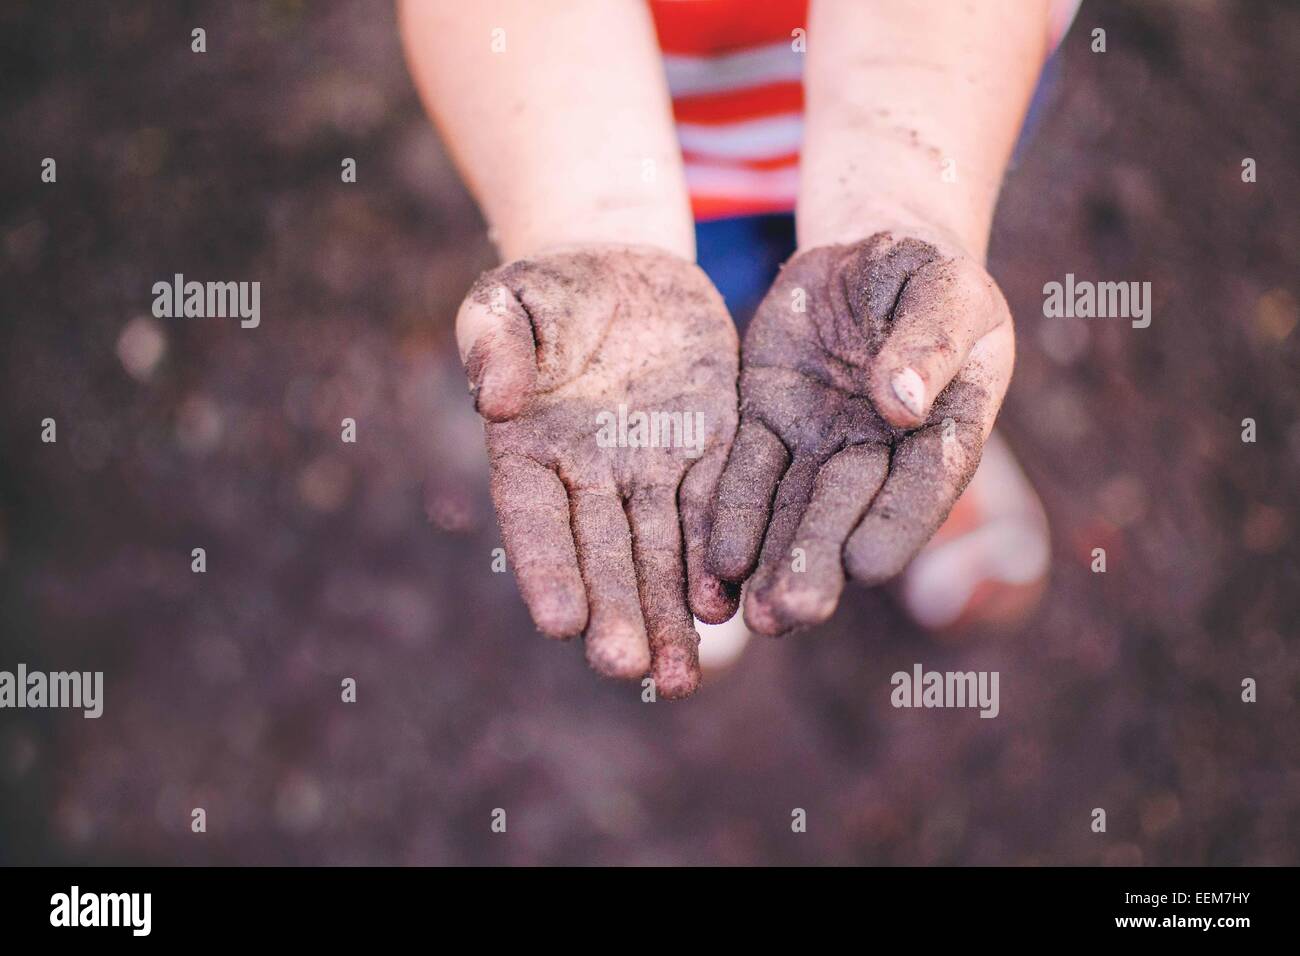 Overhead view of a boy showing his dirty hands Stock Photo